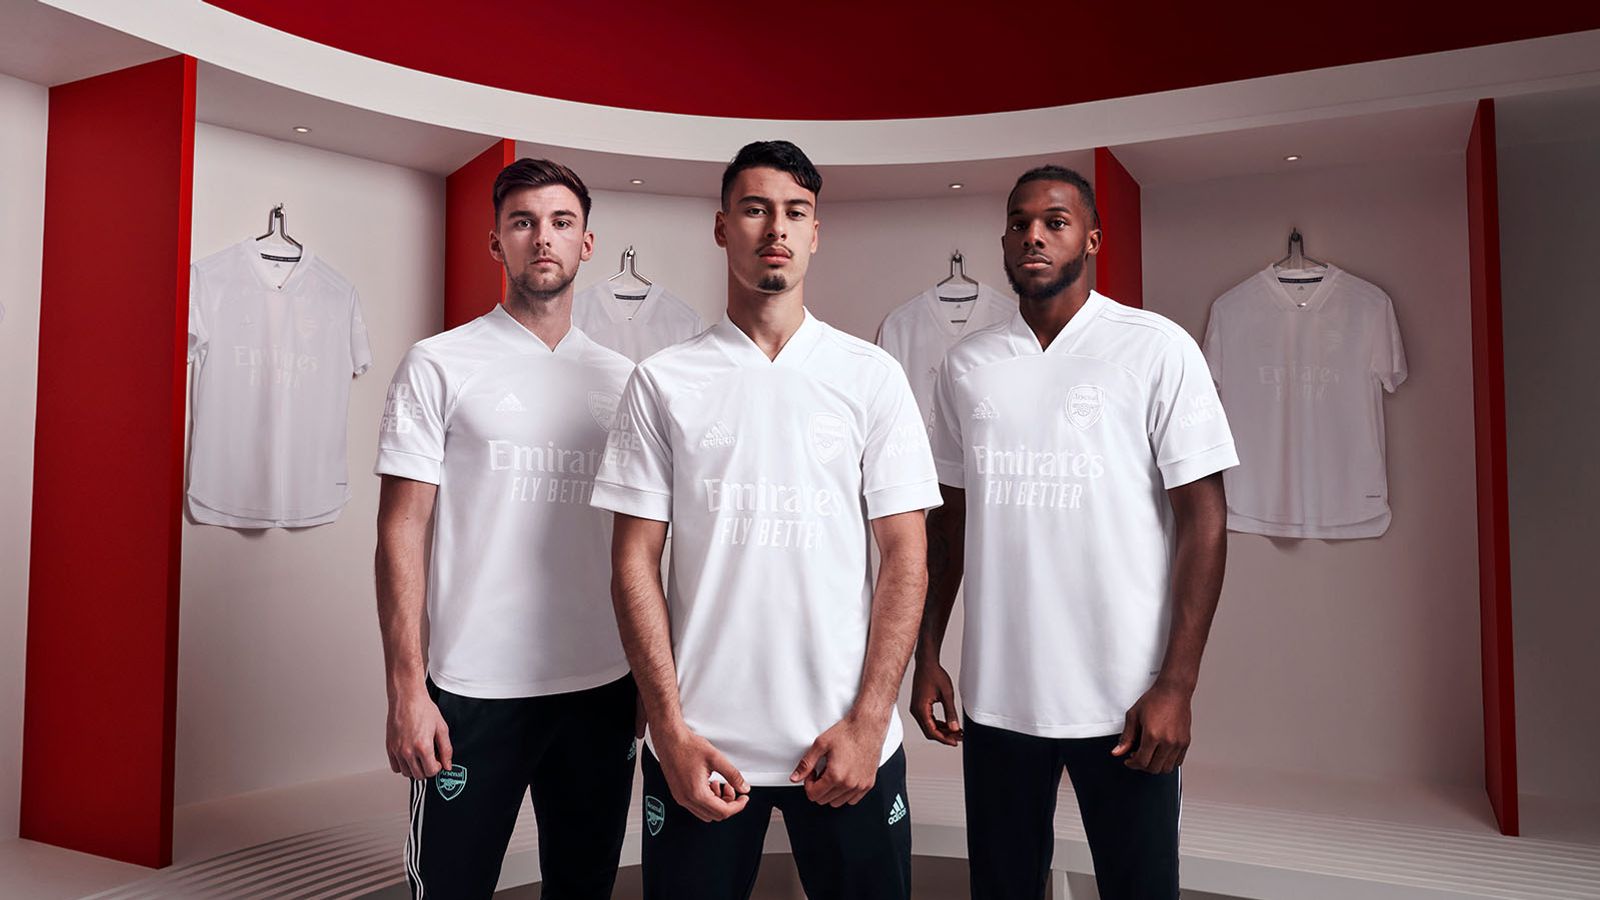 Arsenal to remove red from shirt and play in all-white in FA Cup as part of adidas anti-knife crime collaboration